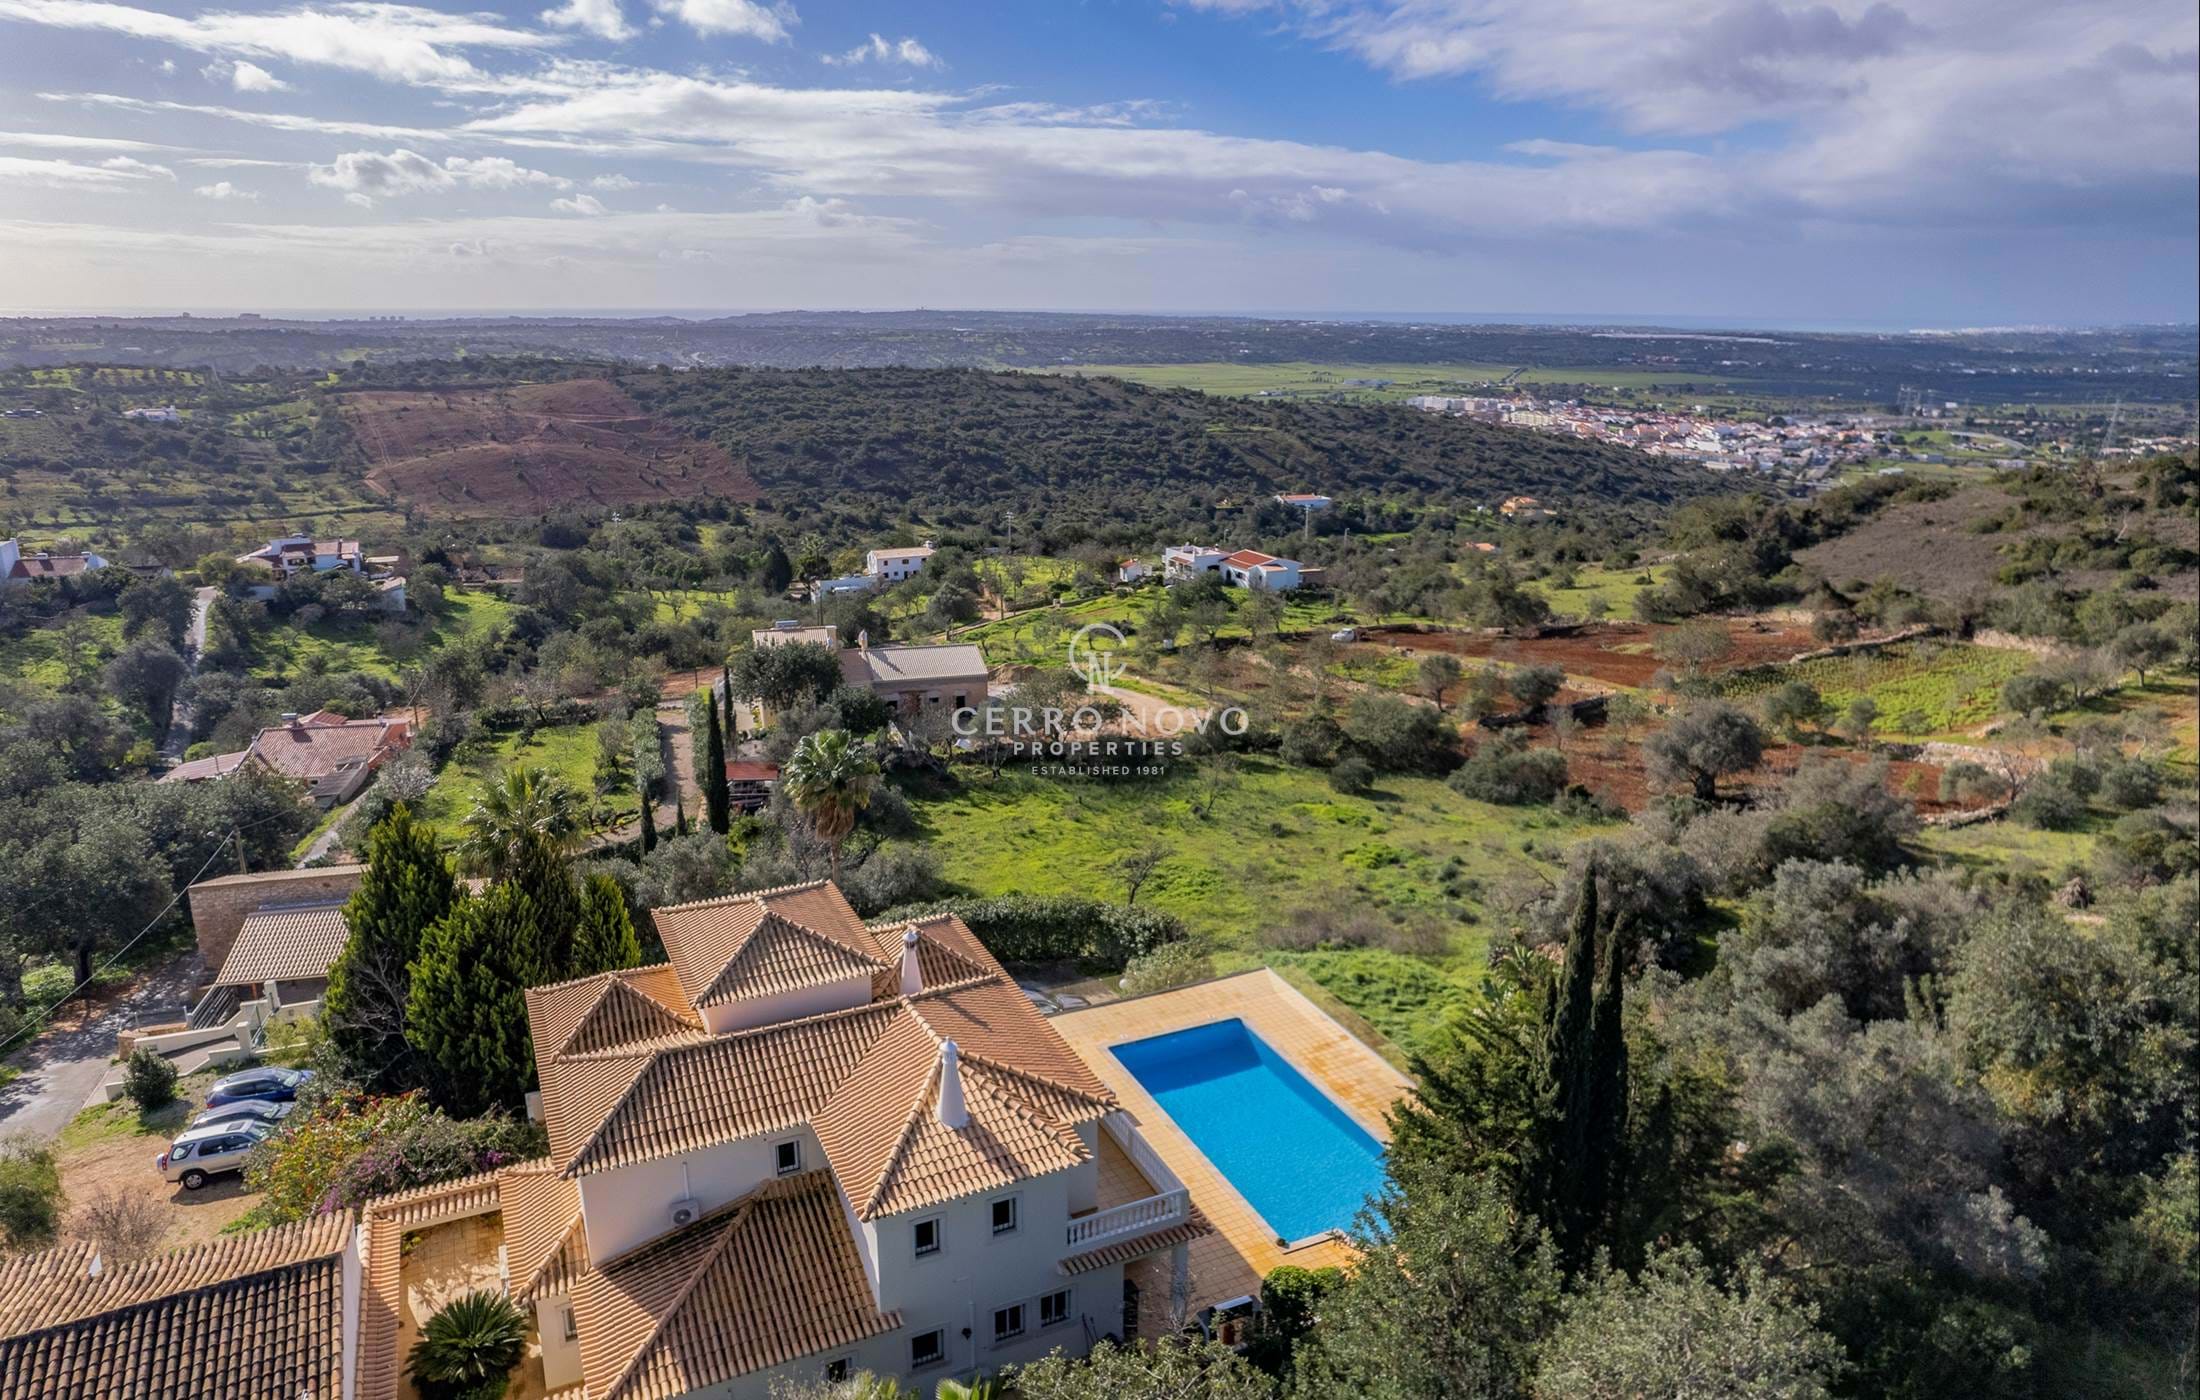  Large country villa with spectacular views to the coast